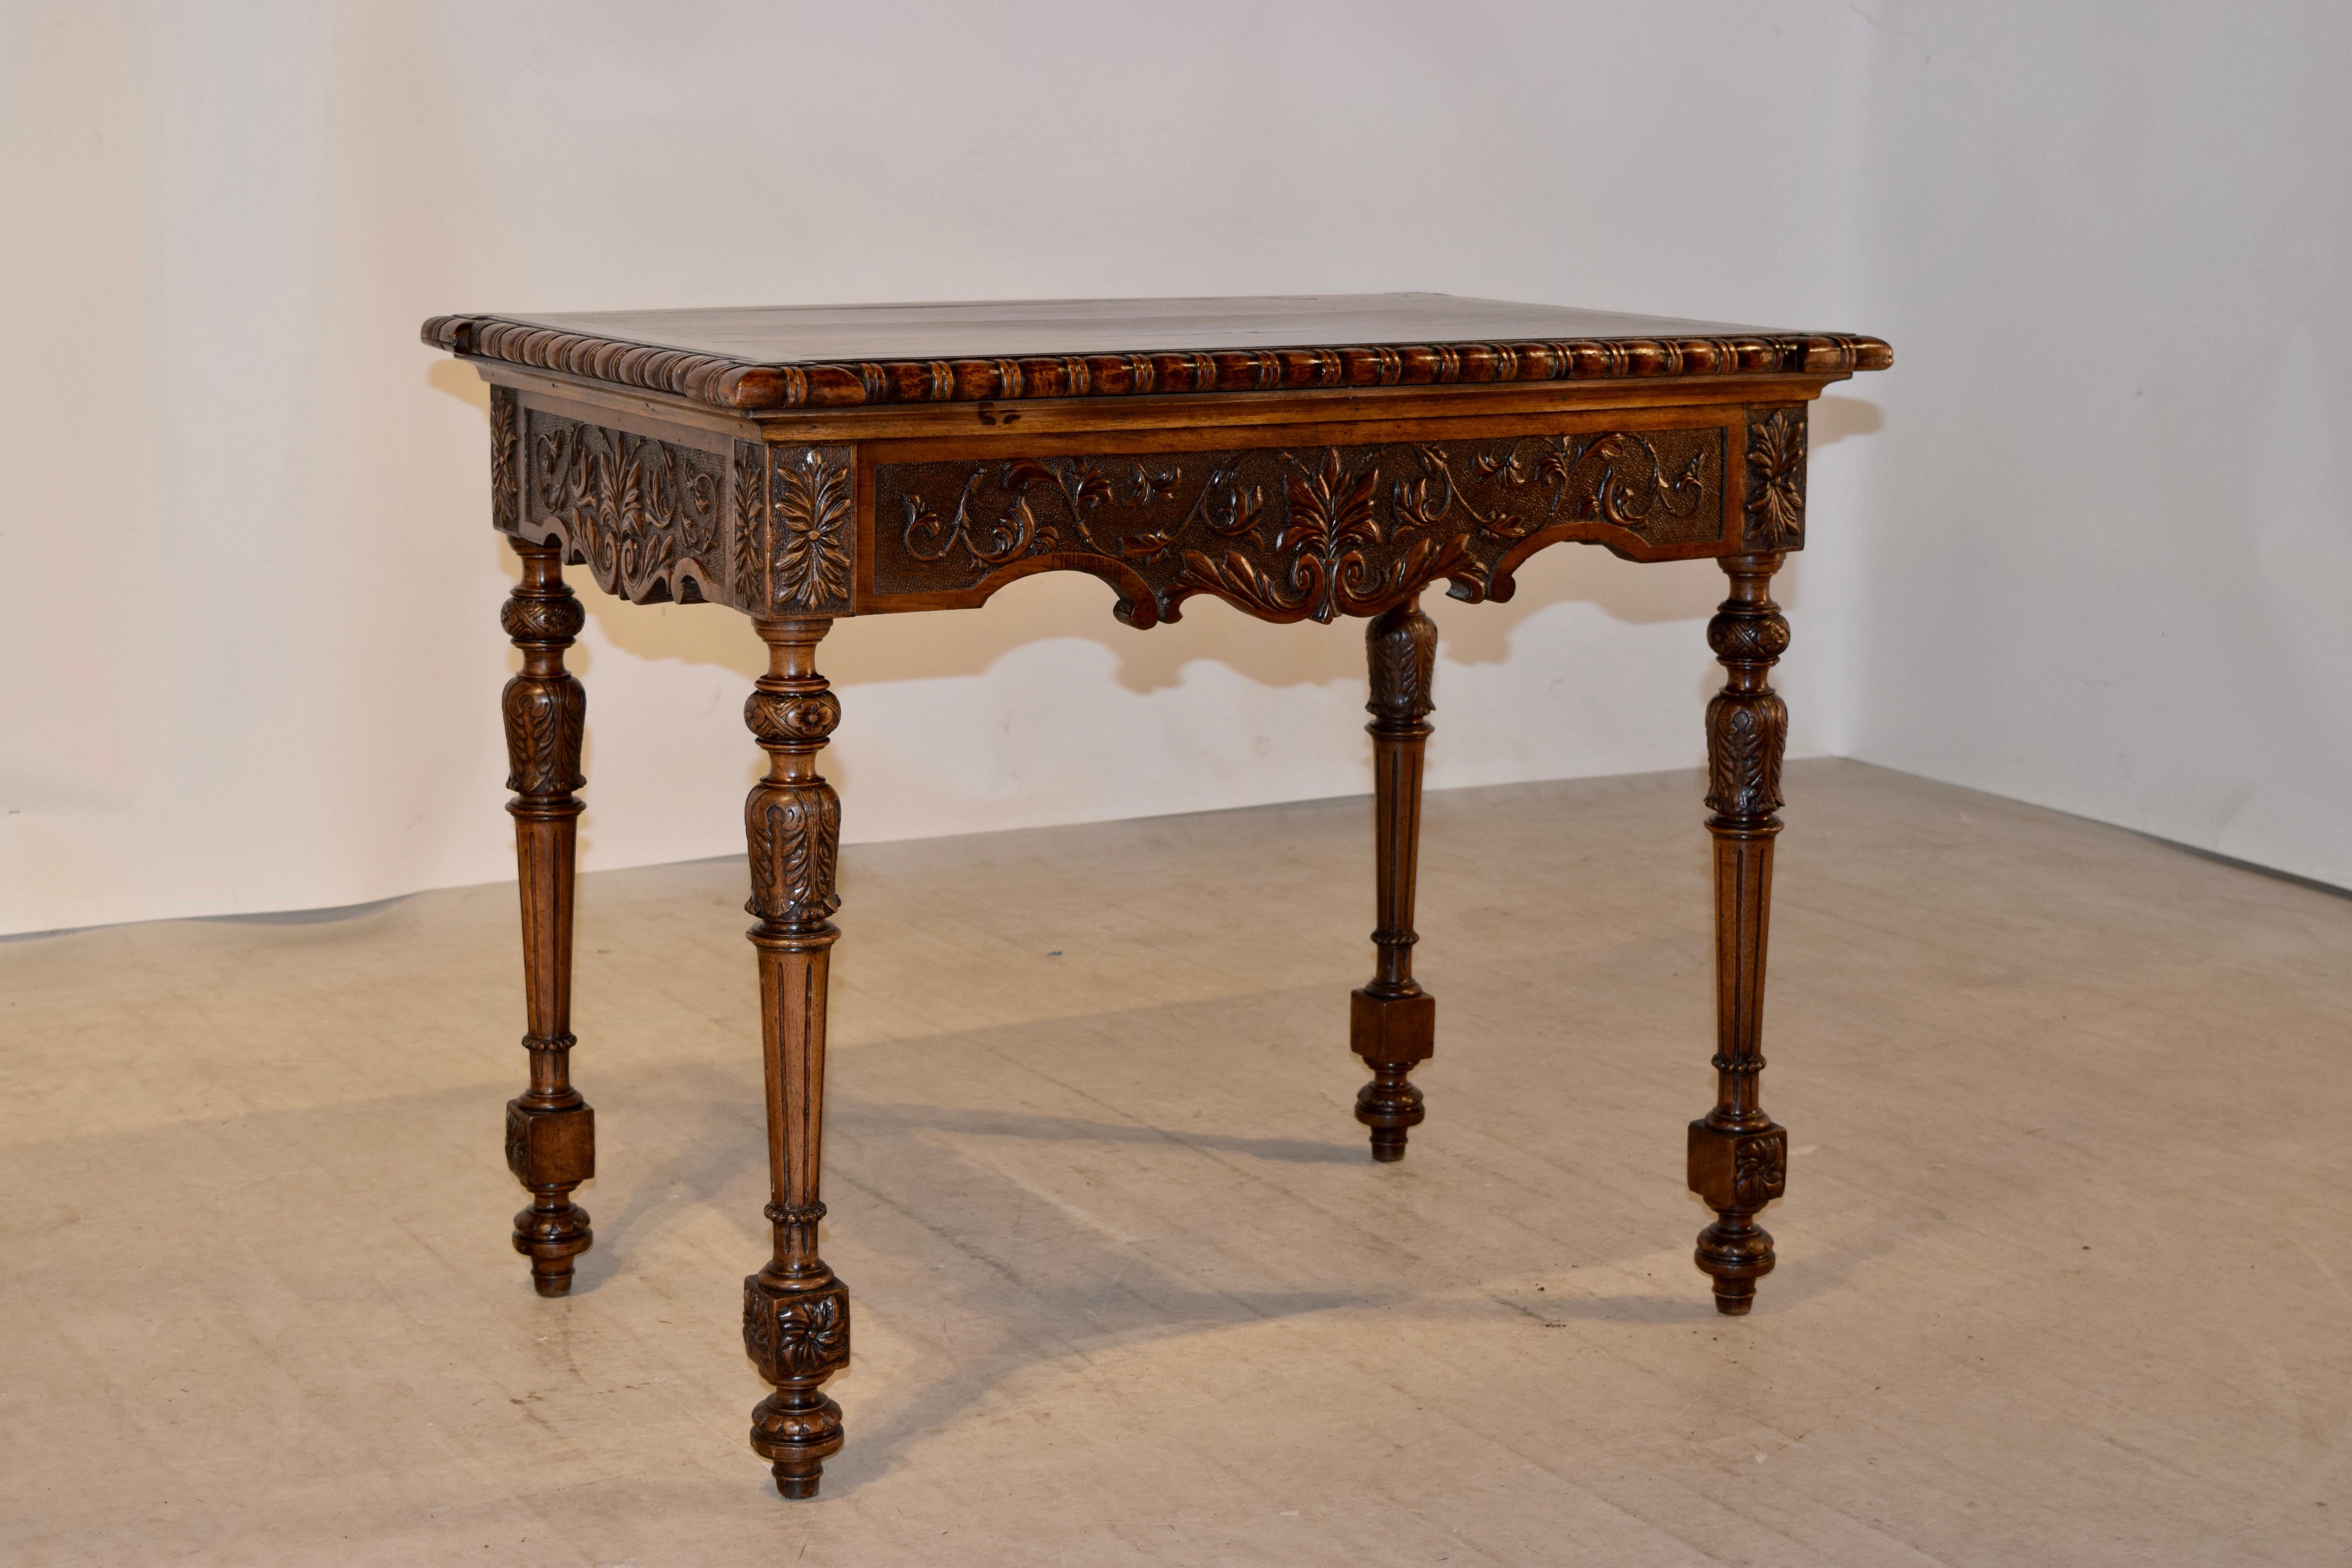 19th century mahogany side table from France with a shaped edge around the top which is hand carved decorated and beveled, following down to a carved and scalloped apron over hand-turned and reeded legs. The legs are tapered and end in carved and